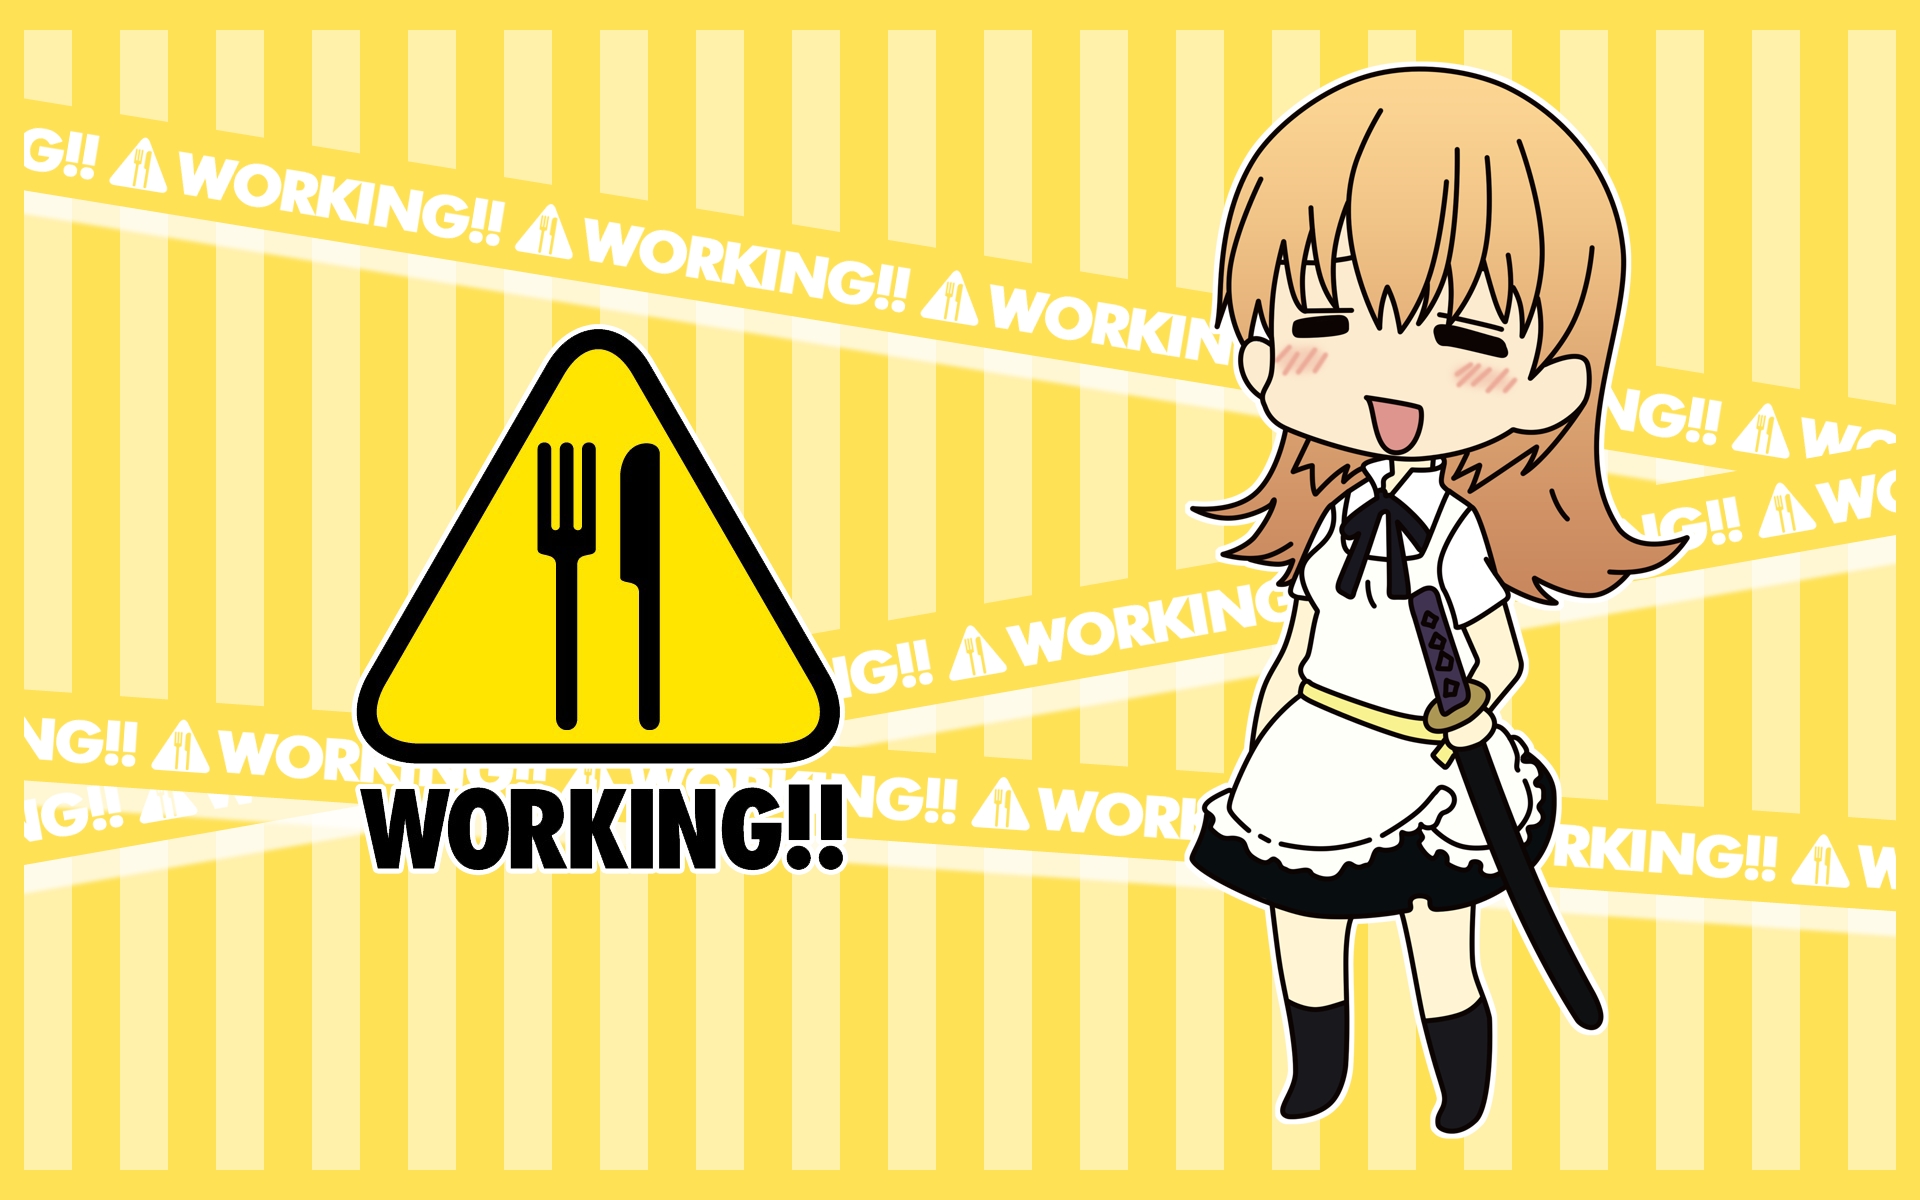 Desktop wallpaper featuring anime characters from the series Working!!